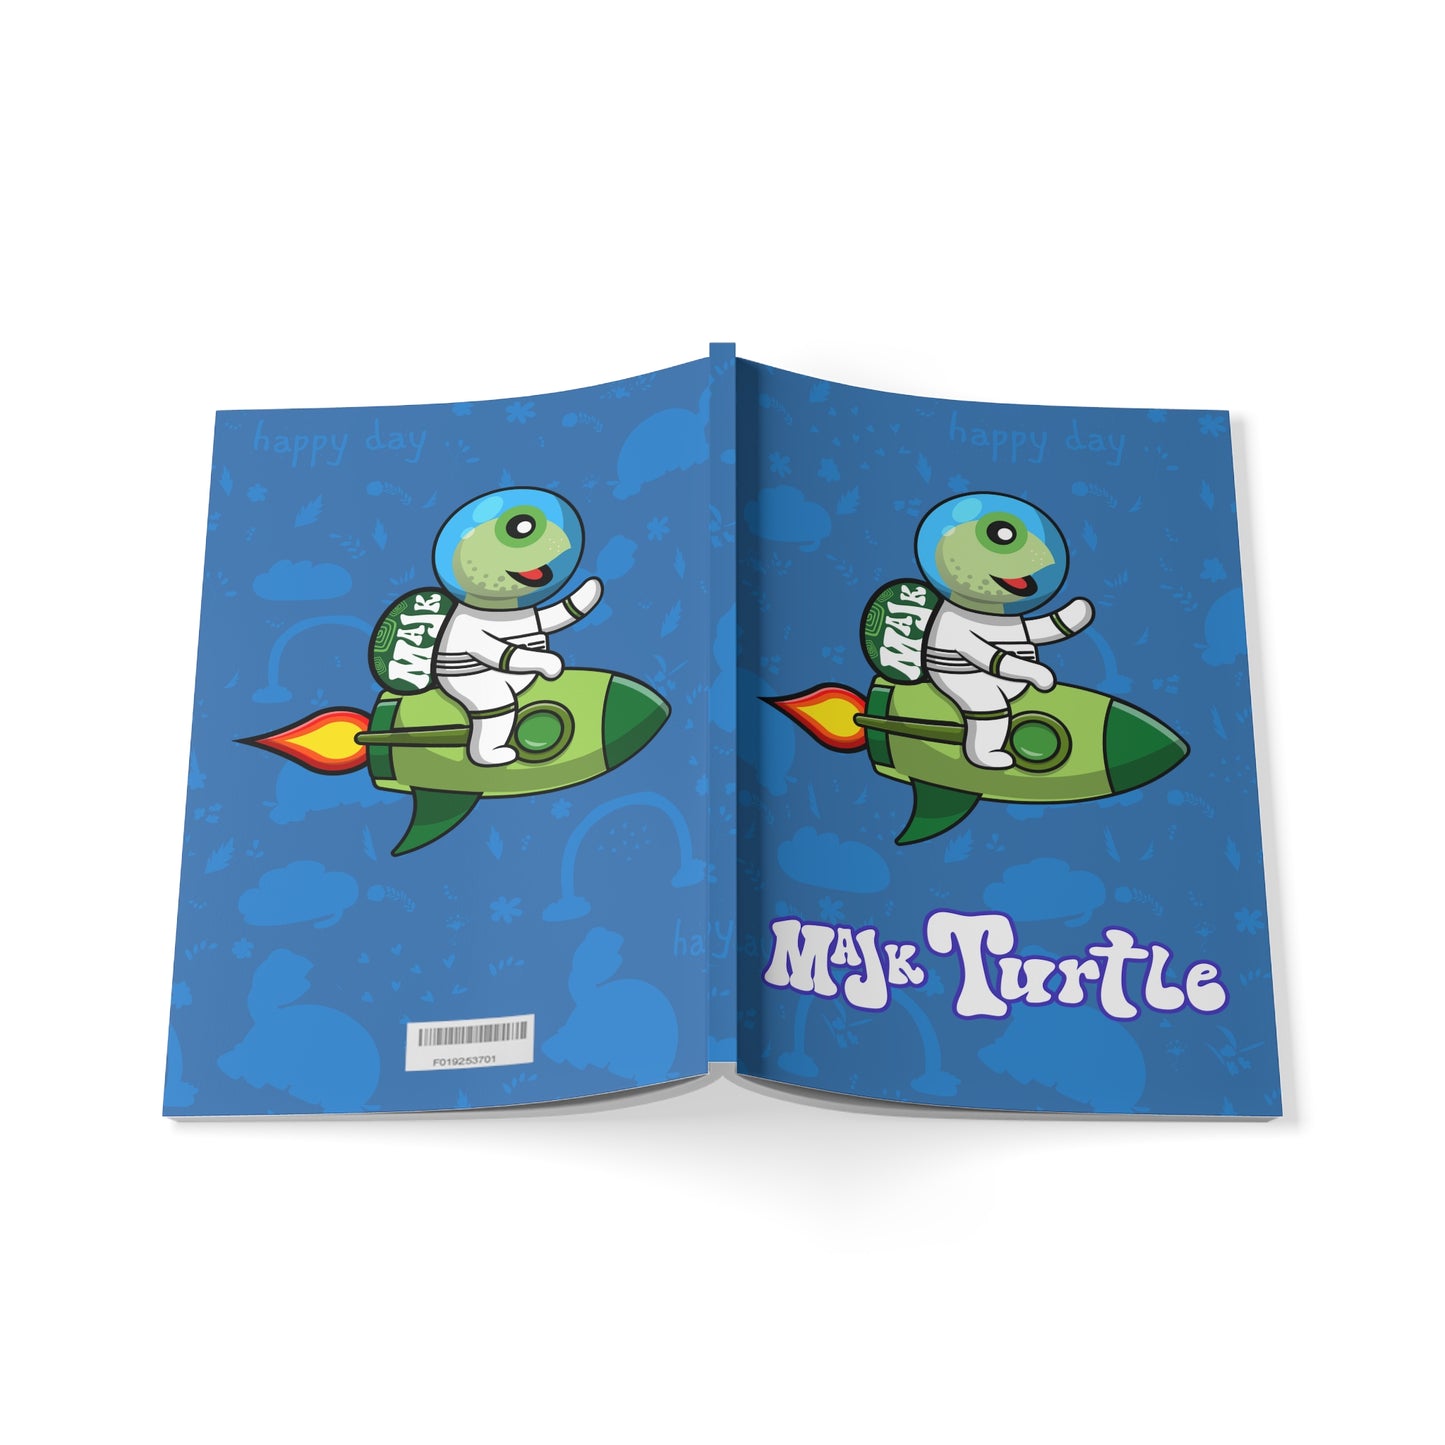 Softcover Notebook "Rocket Turtle"